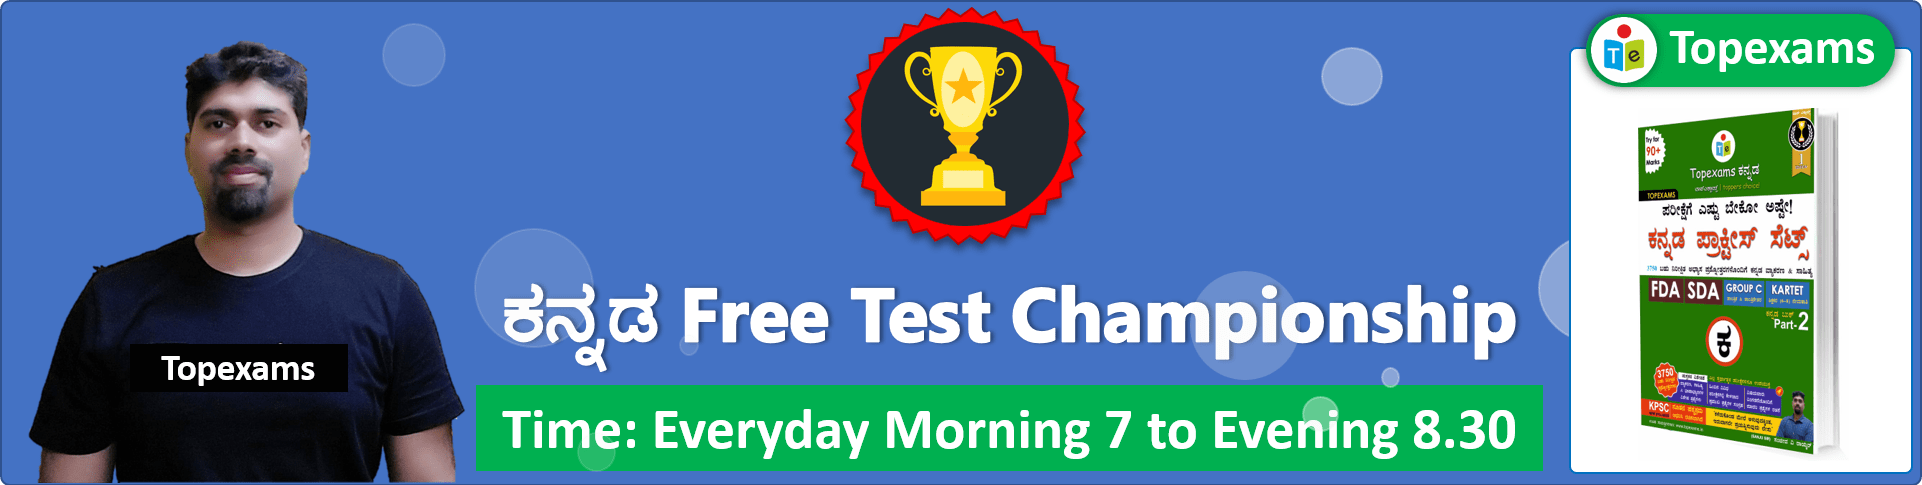 You are currently viewing Test-5 ಕನ್ನಡ Championship  For SDA, FDA, Group C, KARTET